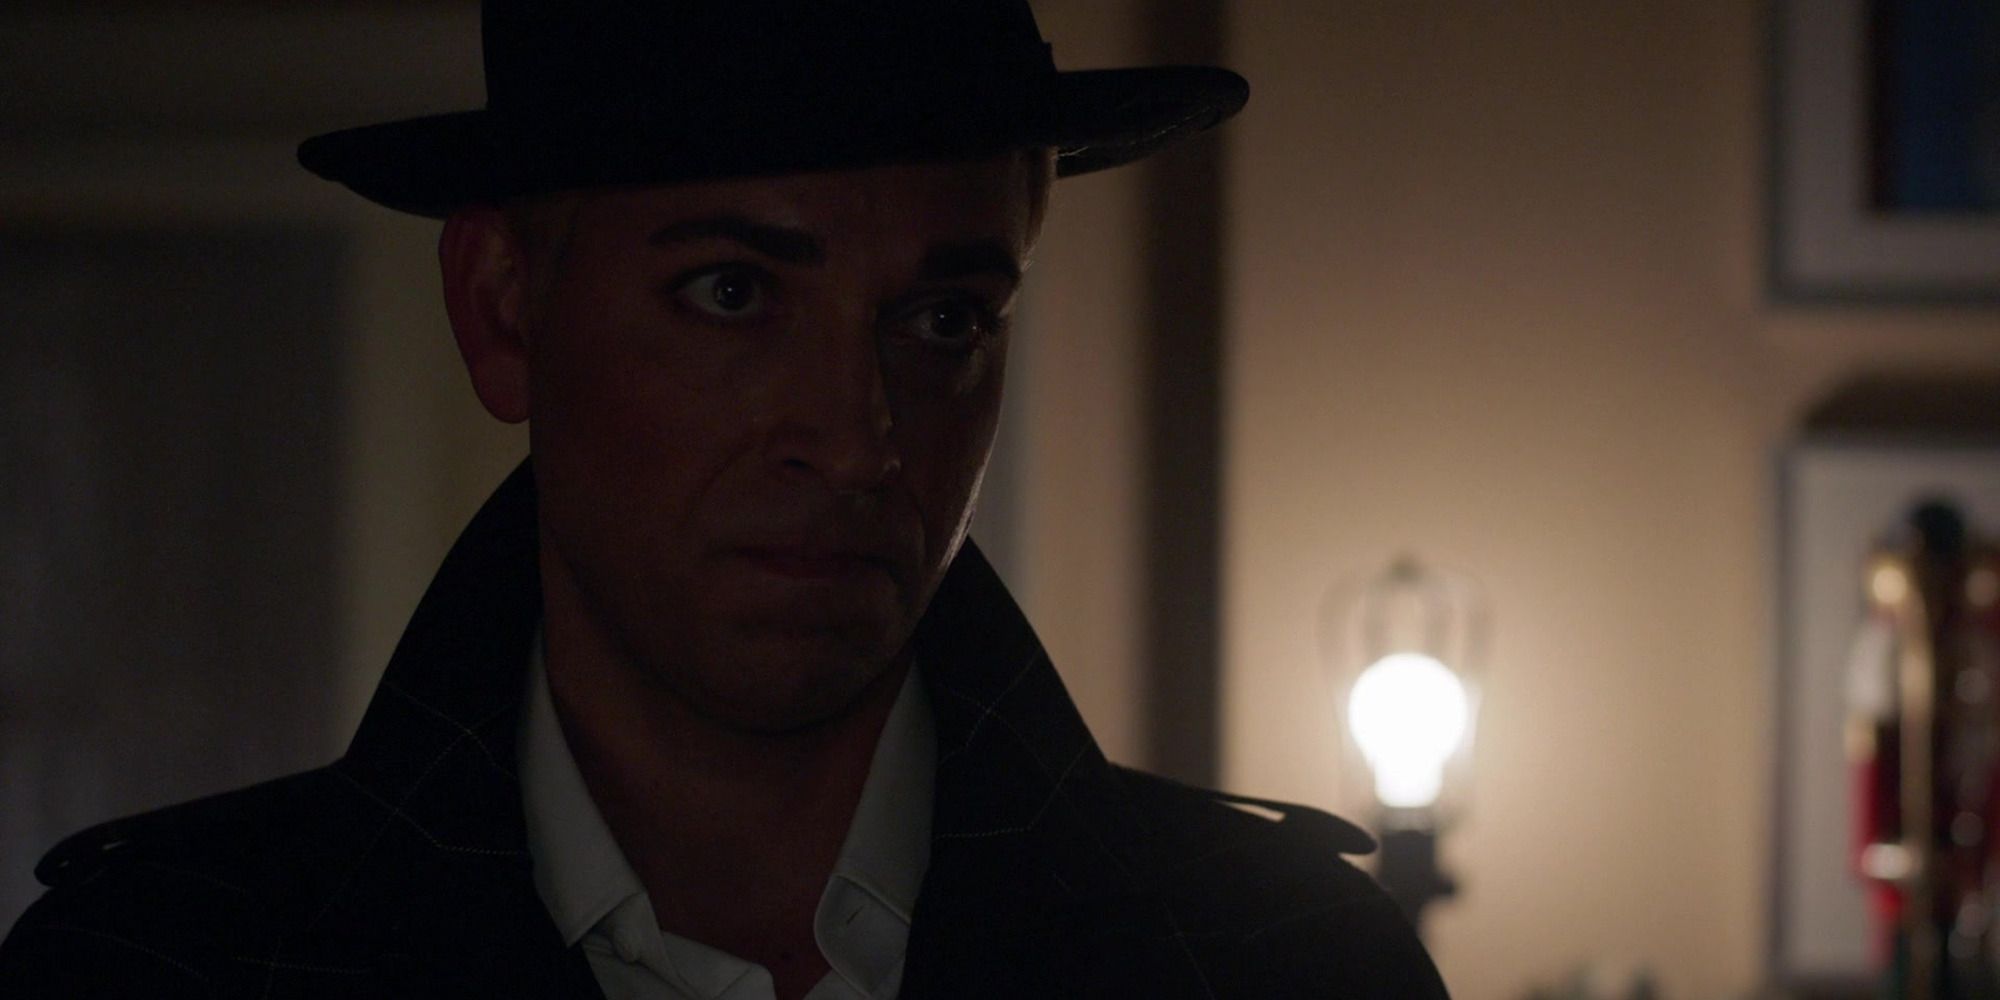 Zachary Levi in 'Psych: The Movie', wearing a black hat in a dimly lit room